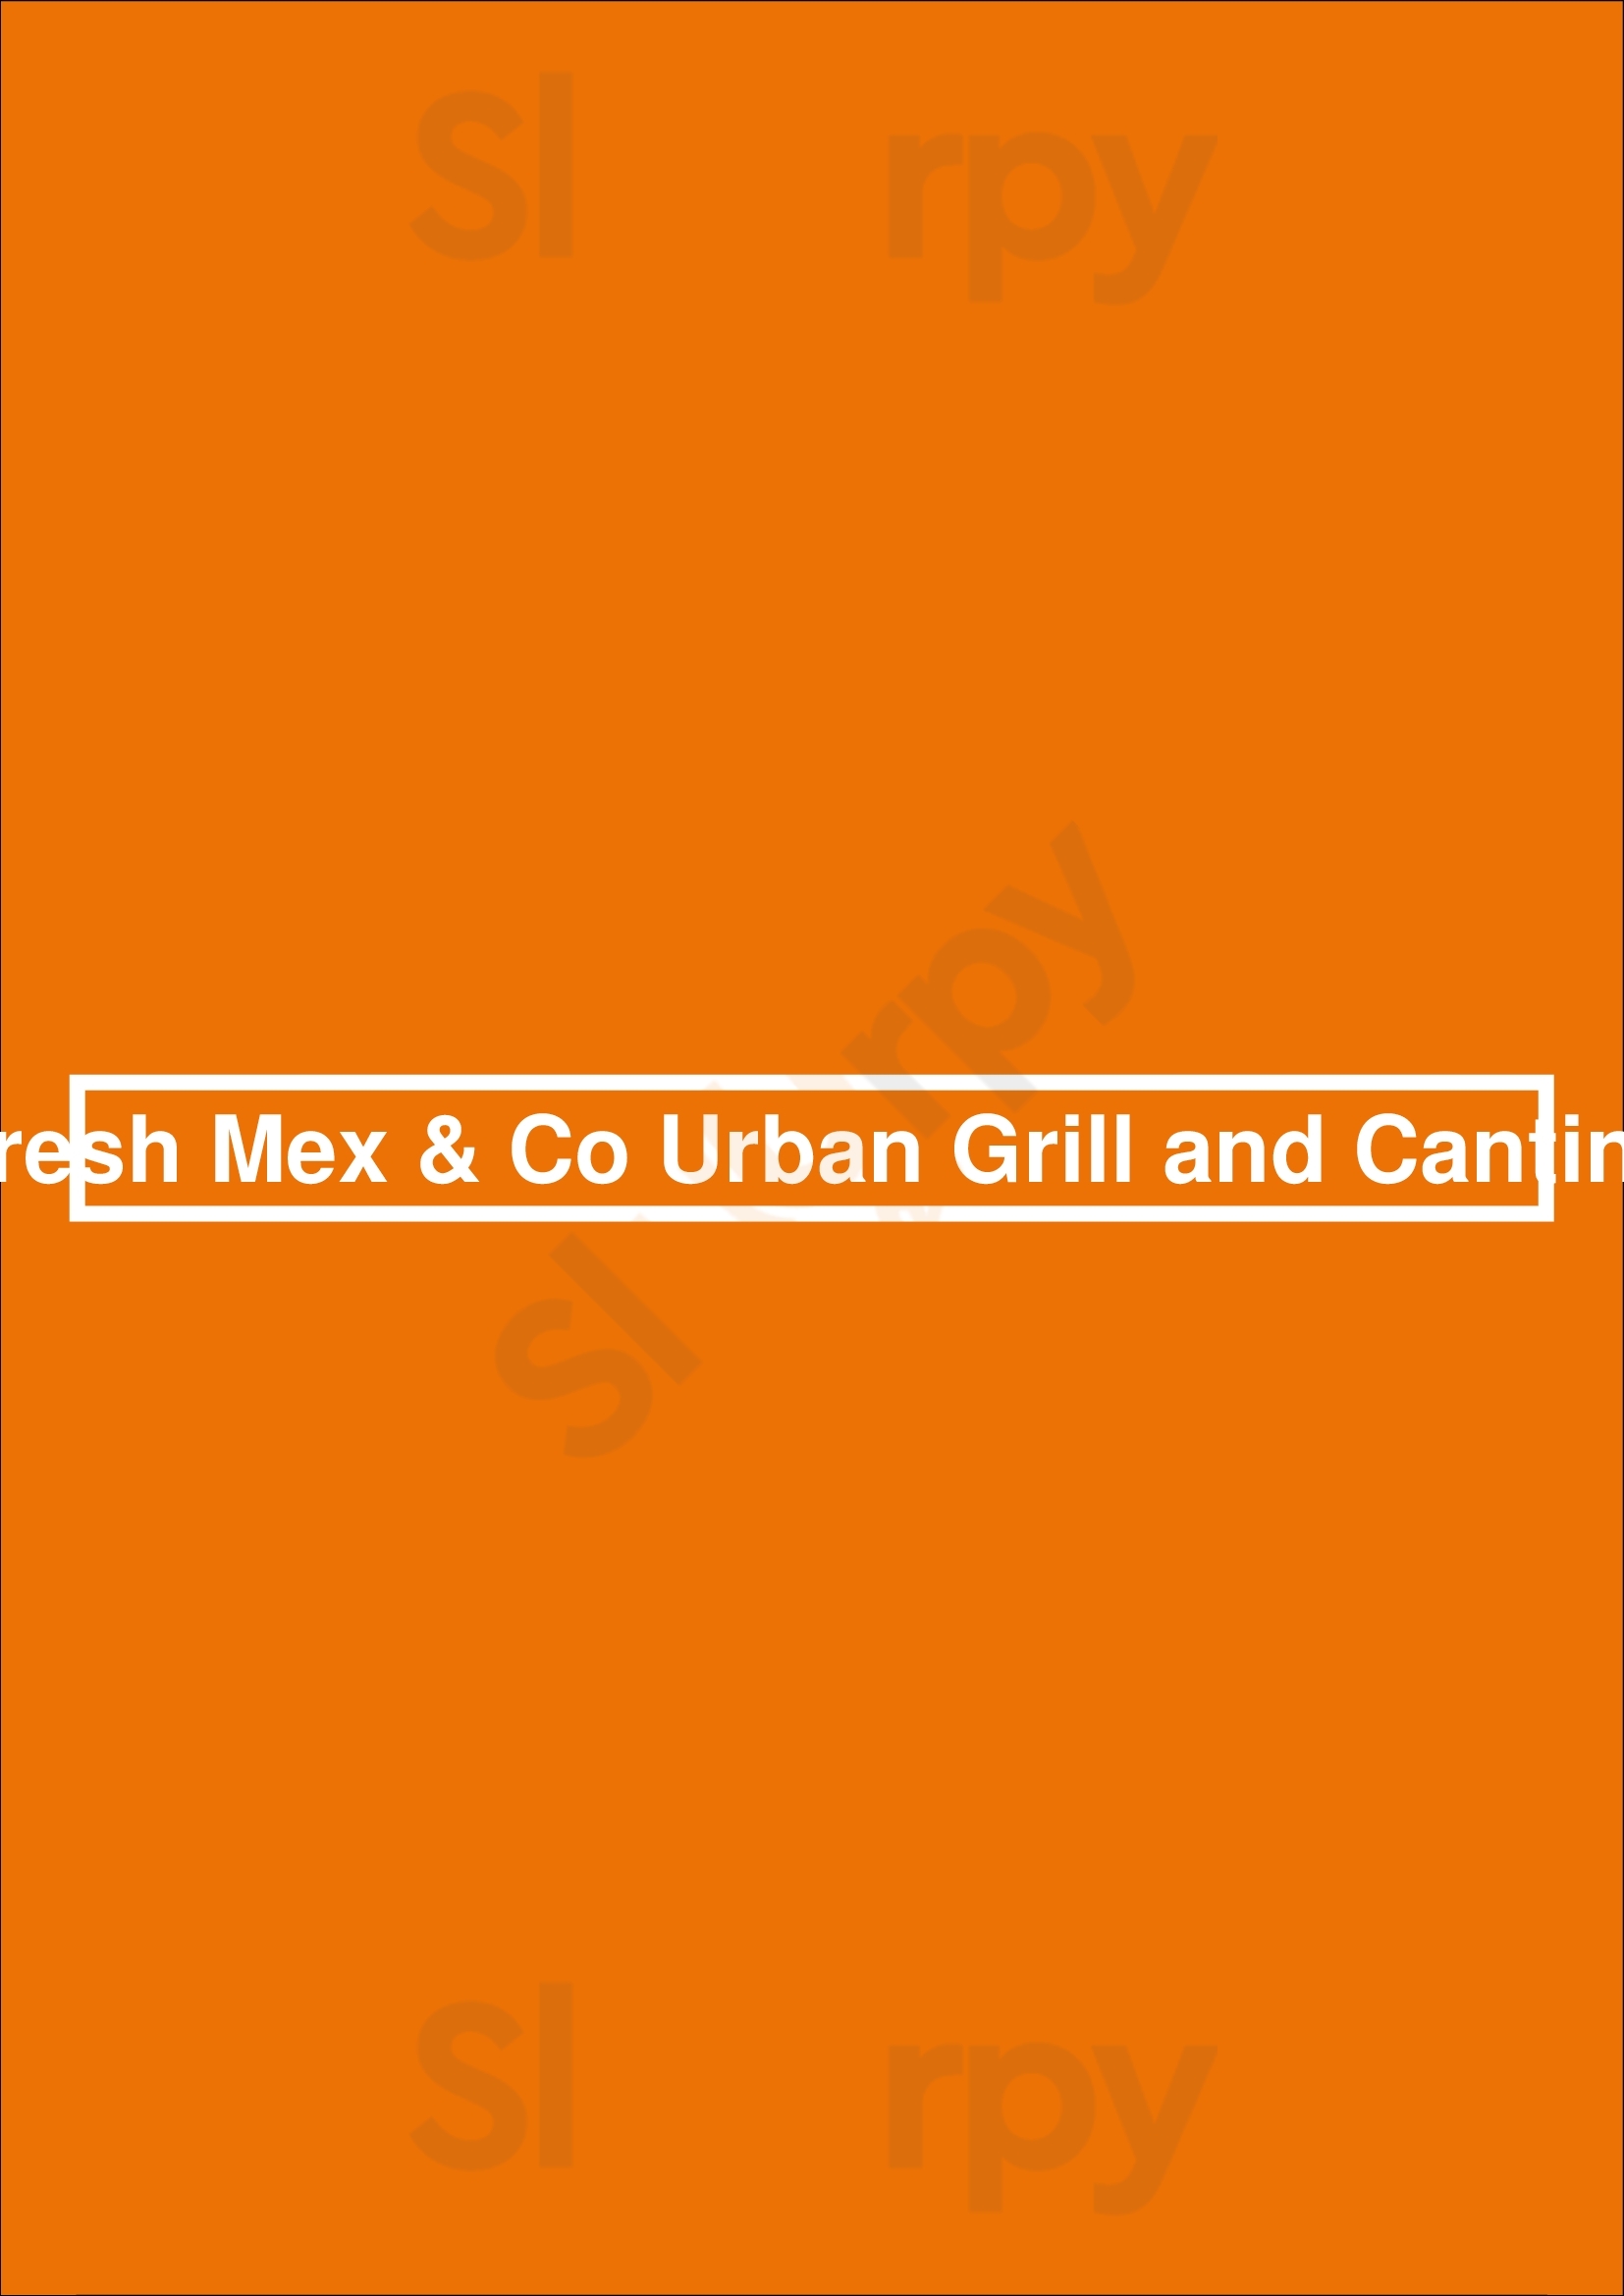 Fresh Mex & Co Urban Grill And Cantina Jacksonville Menu - 1